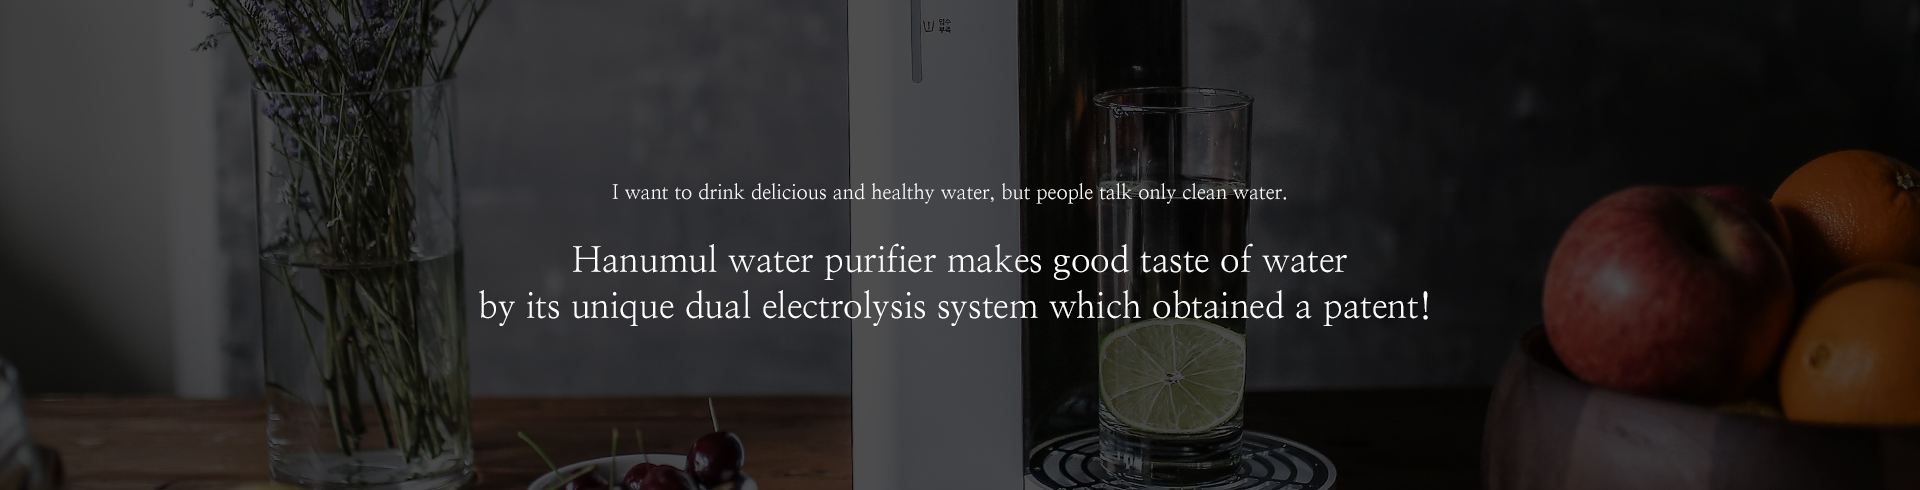 I want to drink delicious and healthy water, but people talk only clean water.Hanumul water purifier makes good taste of water by its unique dual electrolysis system which obtained a patent!